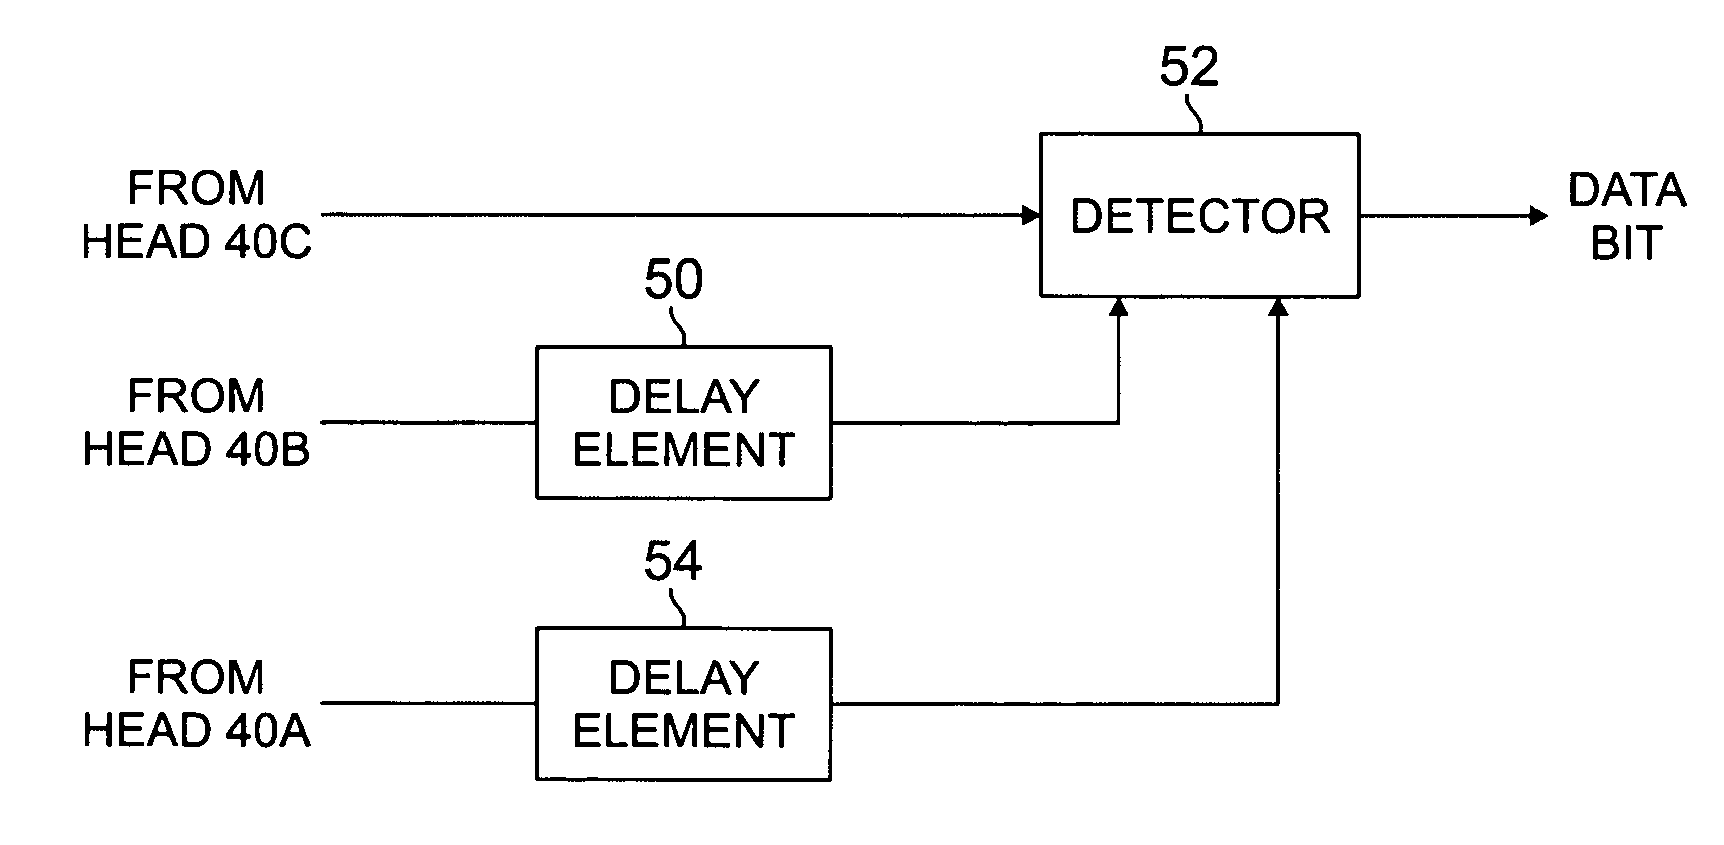 Method and apparatus for improving signal-to-noise ratio for hard disk drives